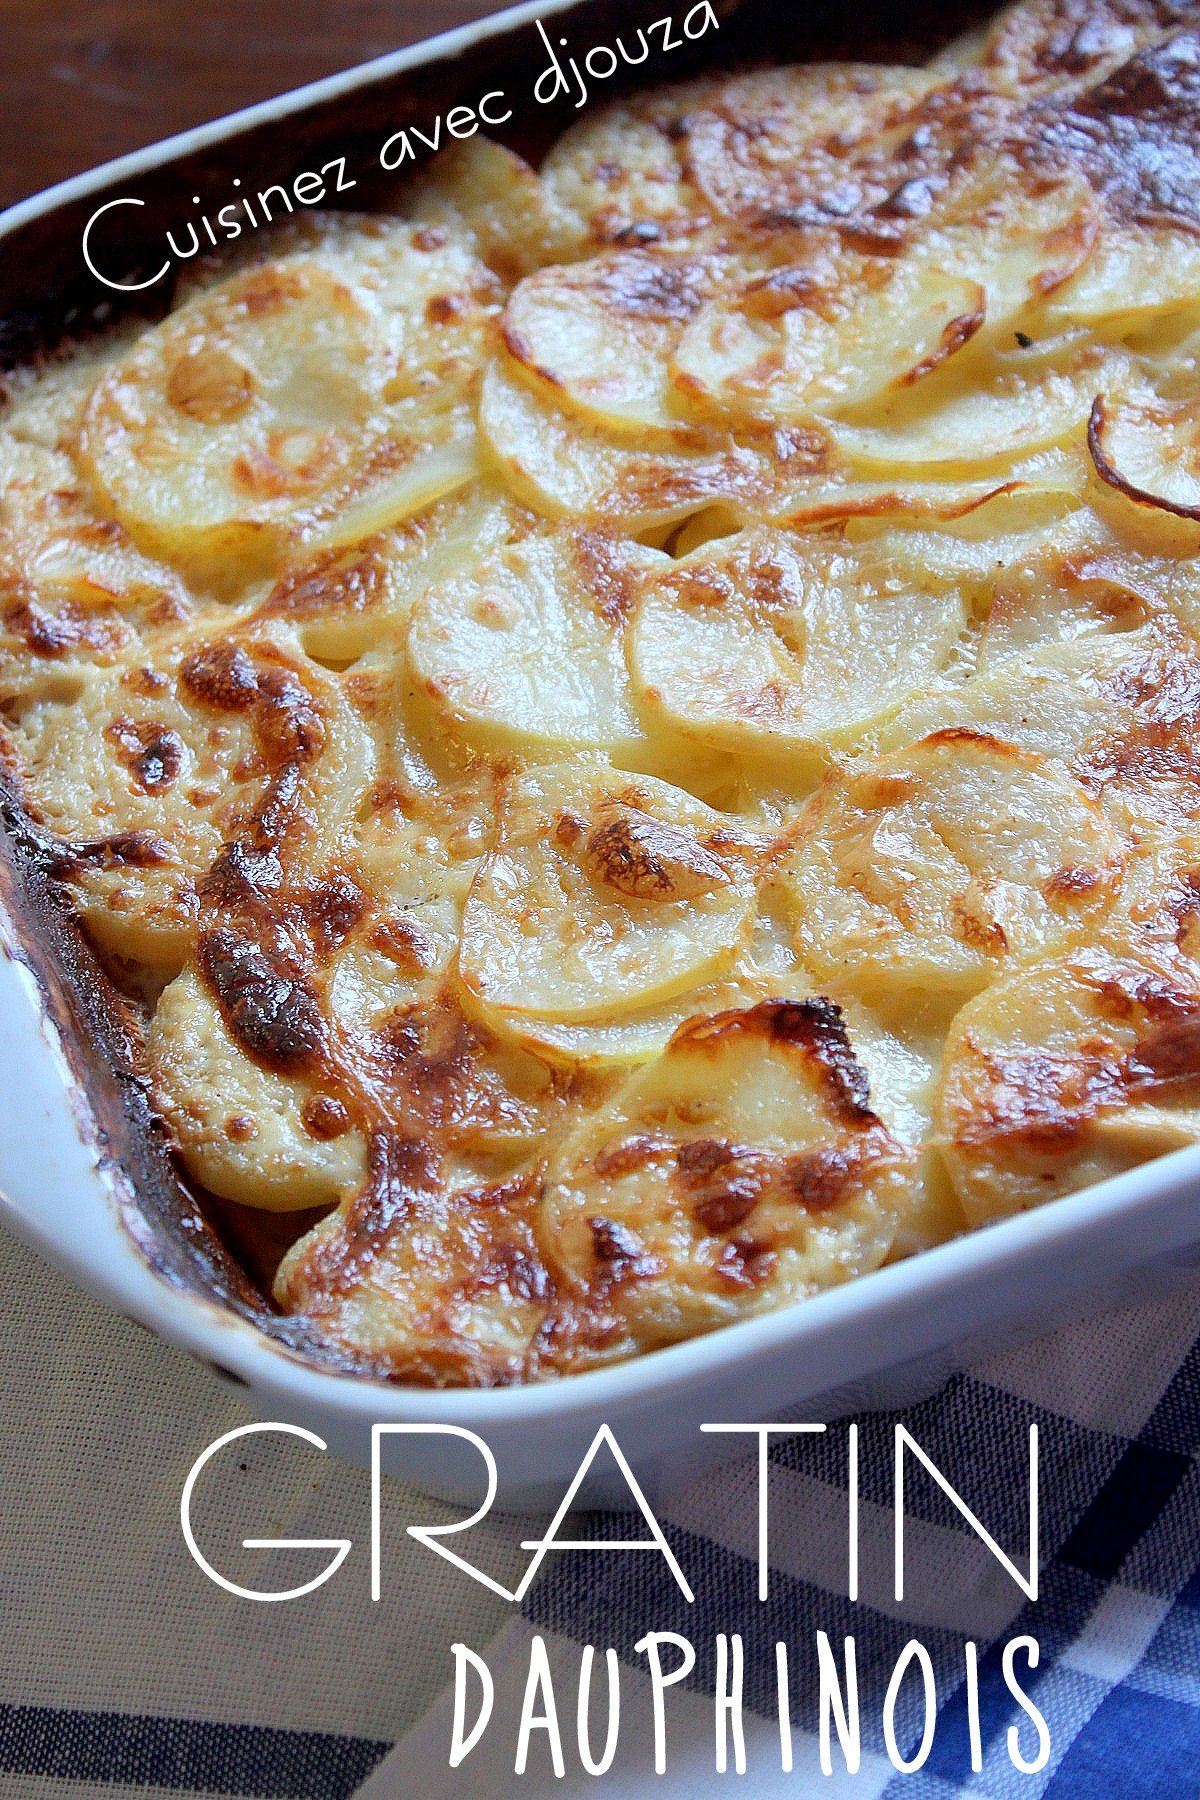 Gratin dauphinois recette traditionnelle